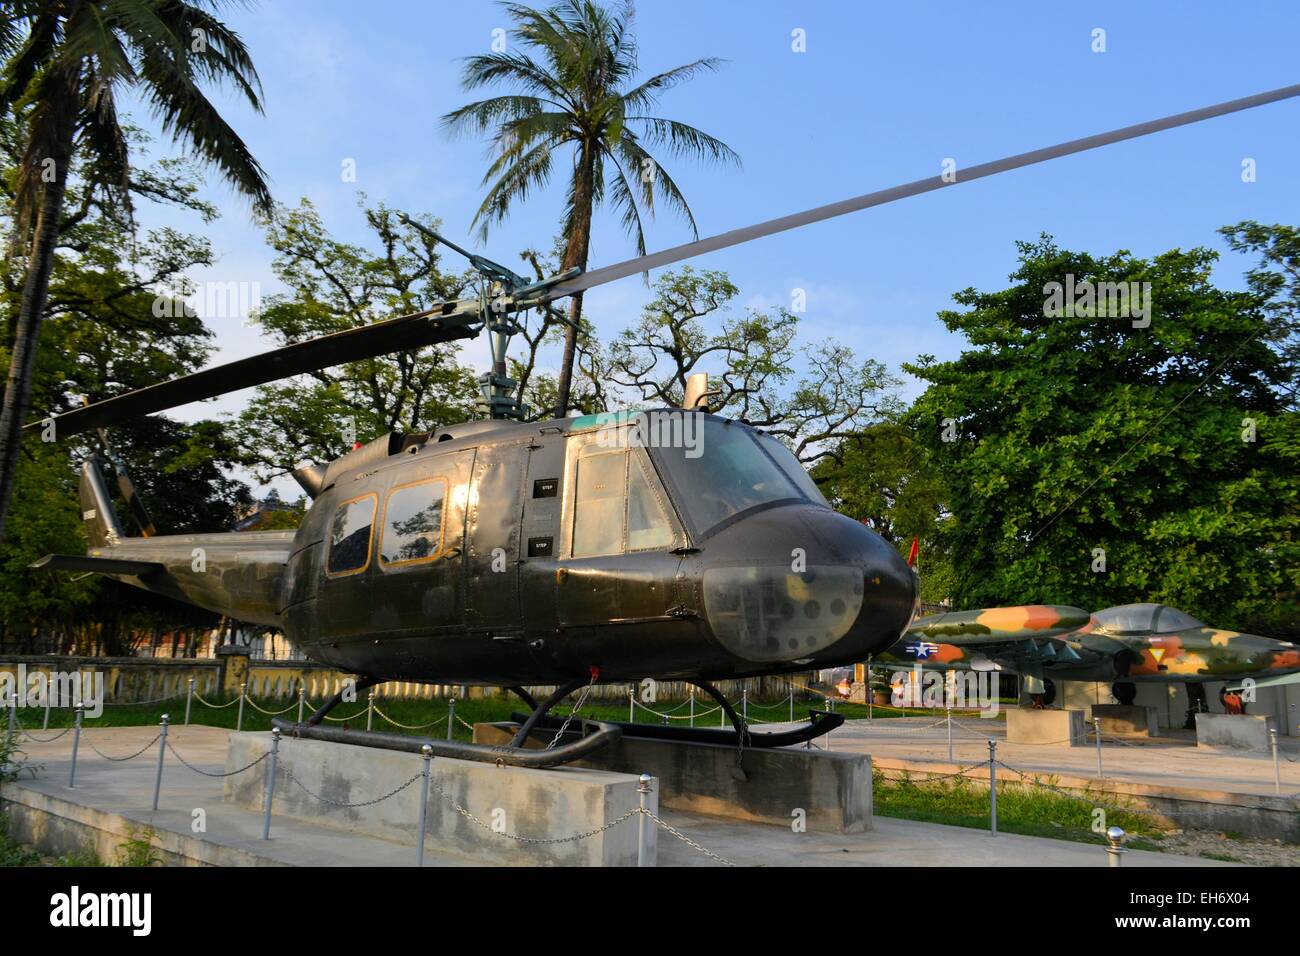 US Military helicopter used during the Vietnam War Stock Photo